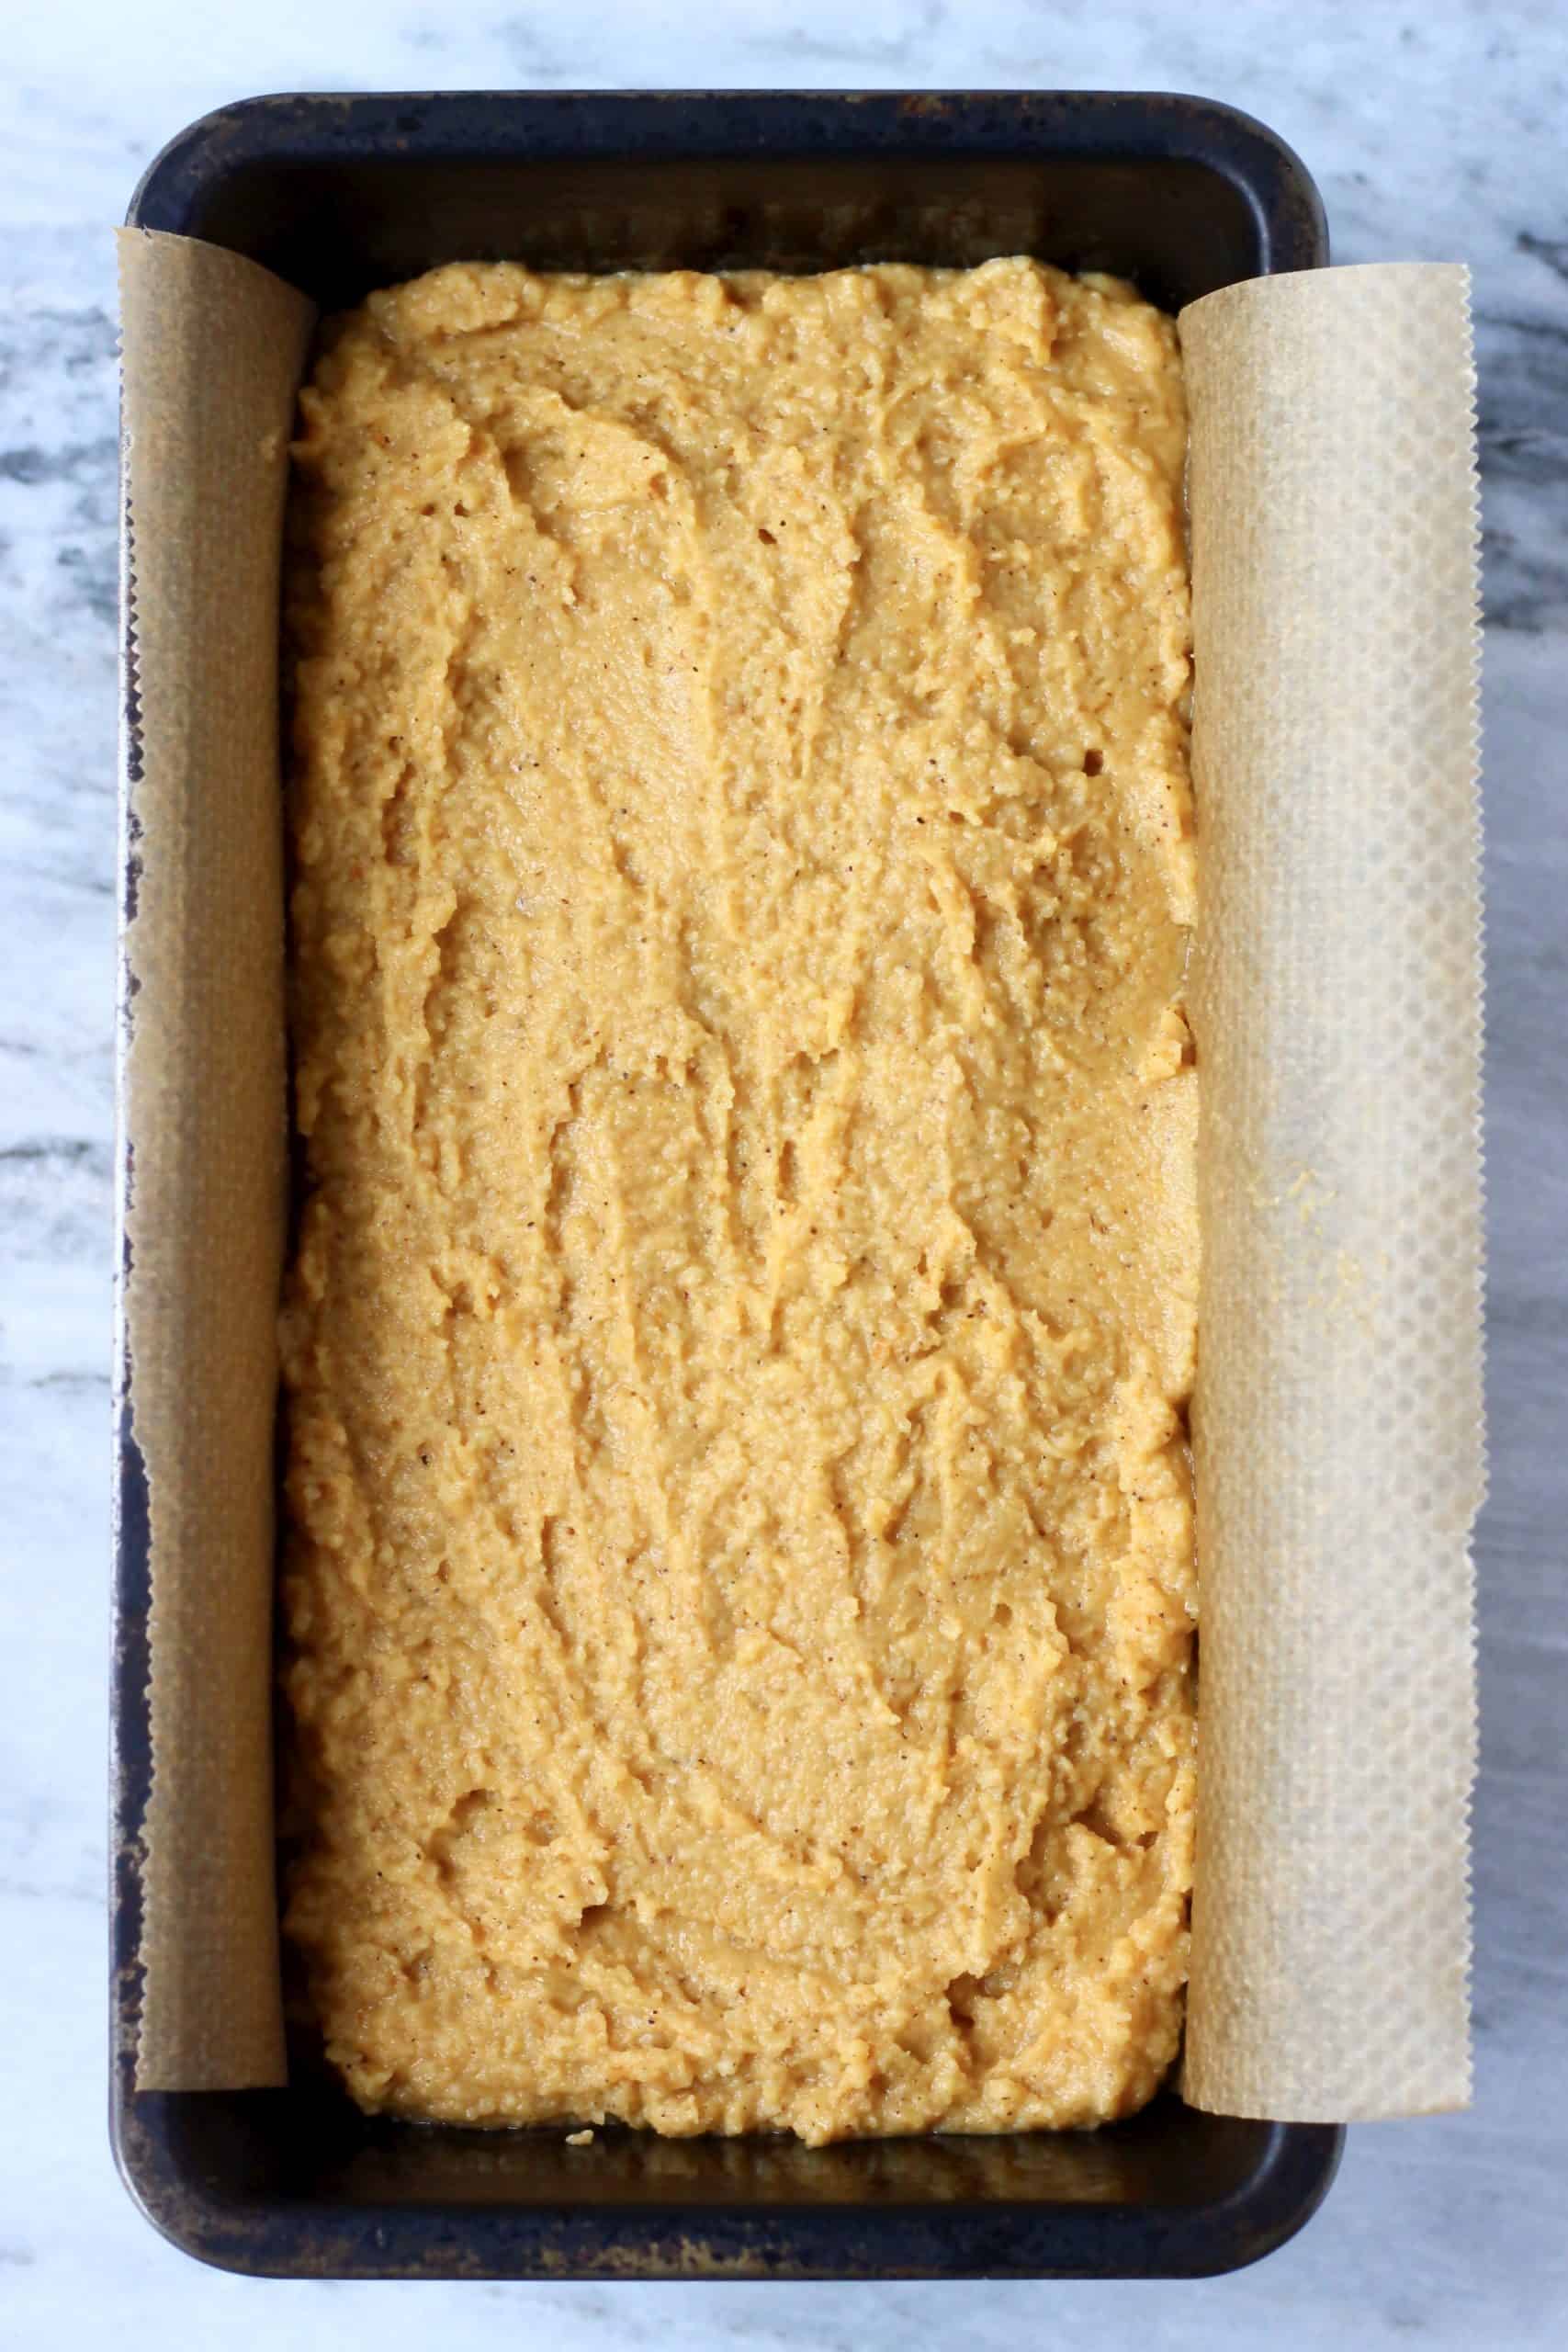 Gluten-free vegan pumpkin bread batter in a loaf tin lined with baking paper